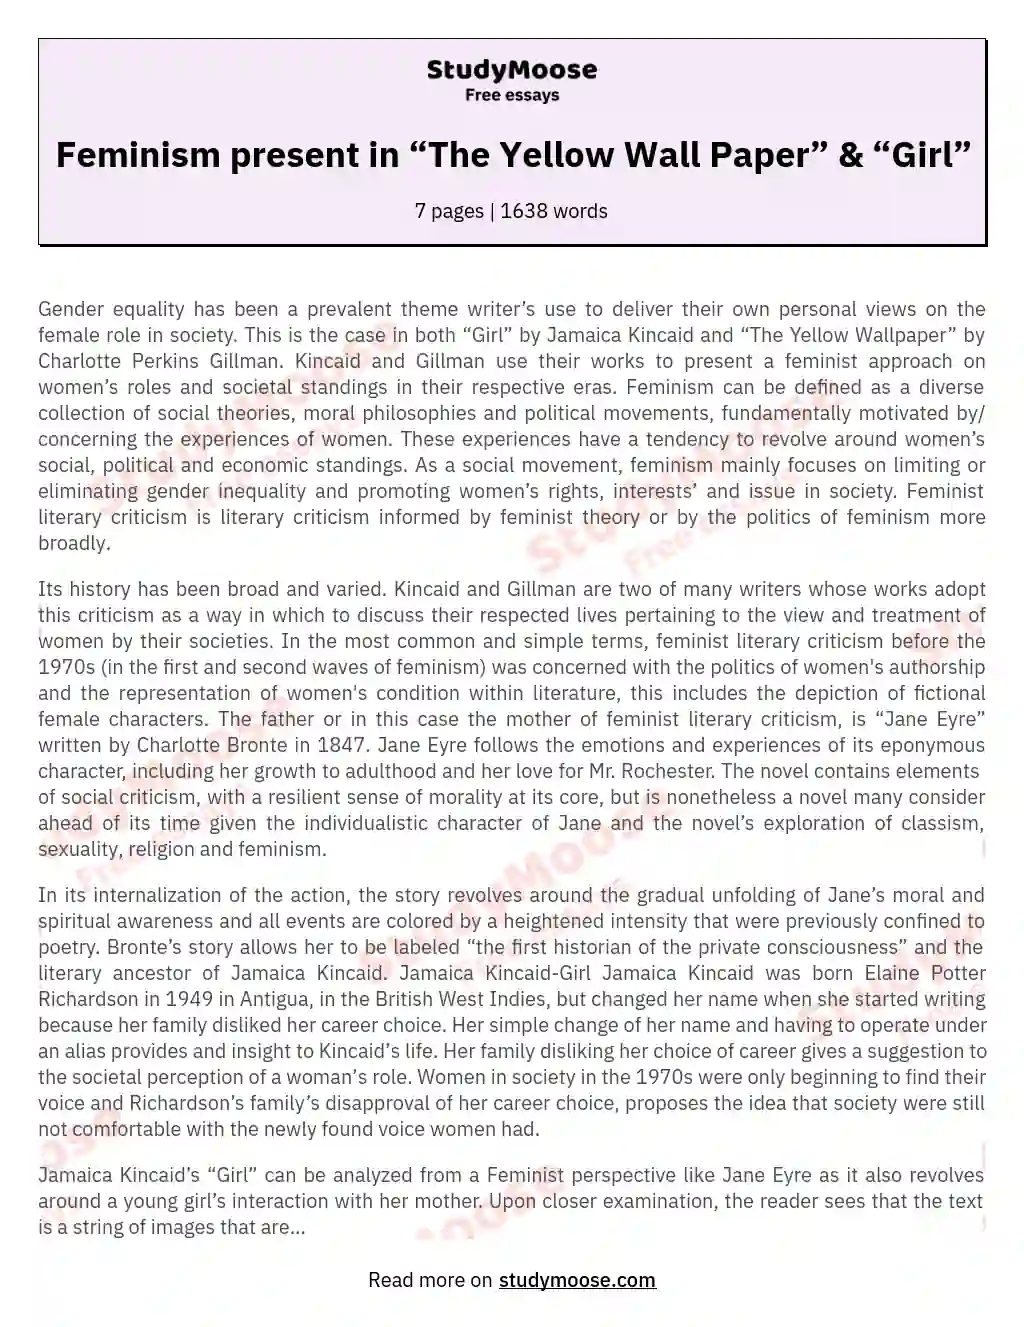 Feminism present in “The Yellow Wall Paper” & “Girl”